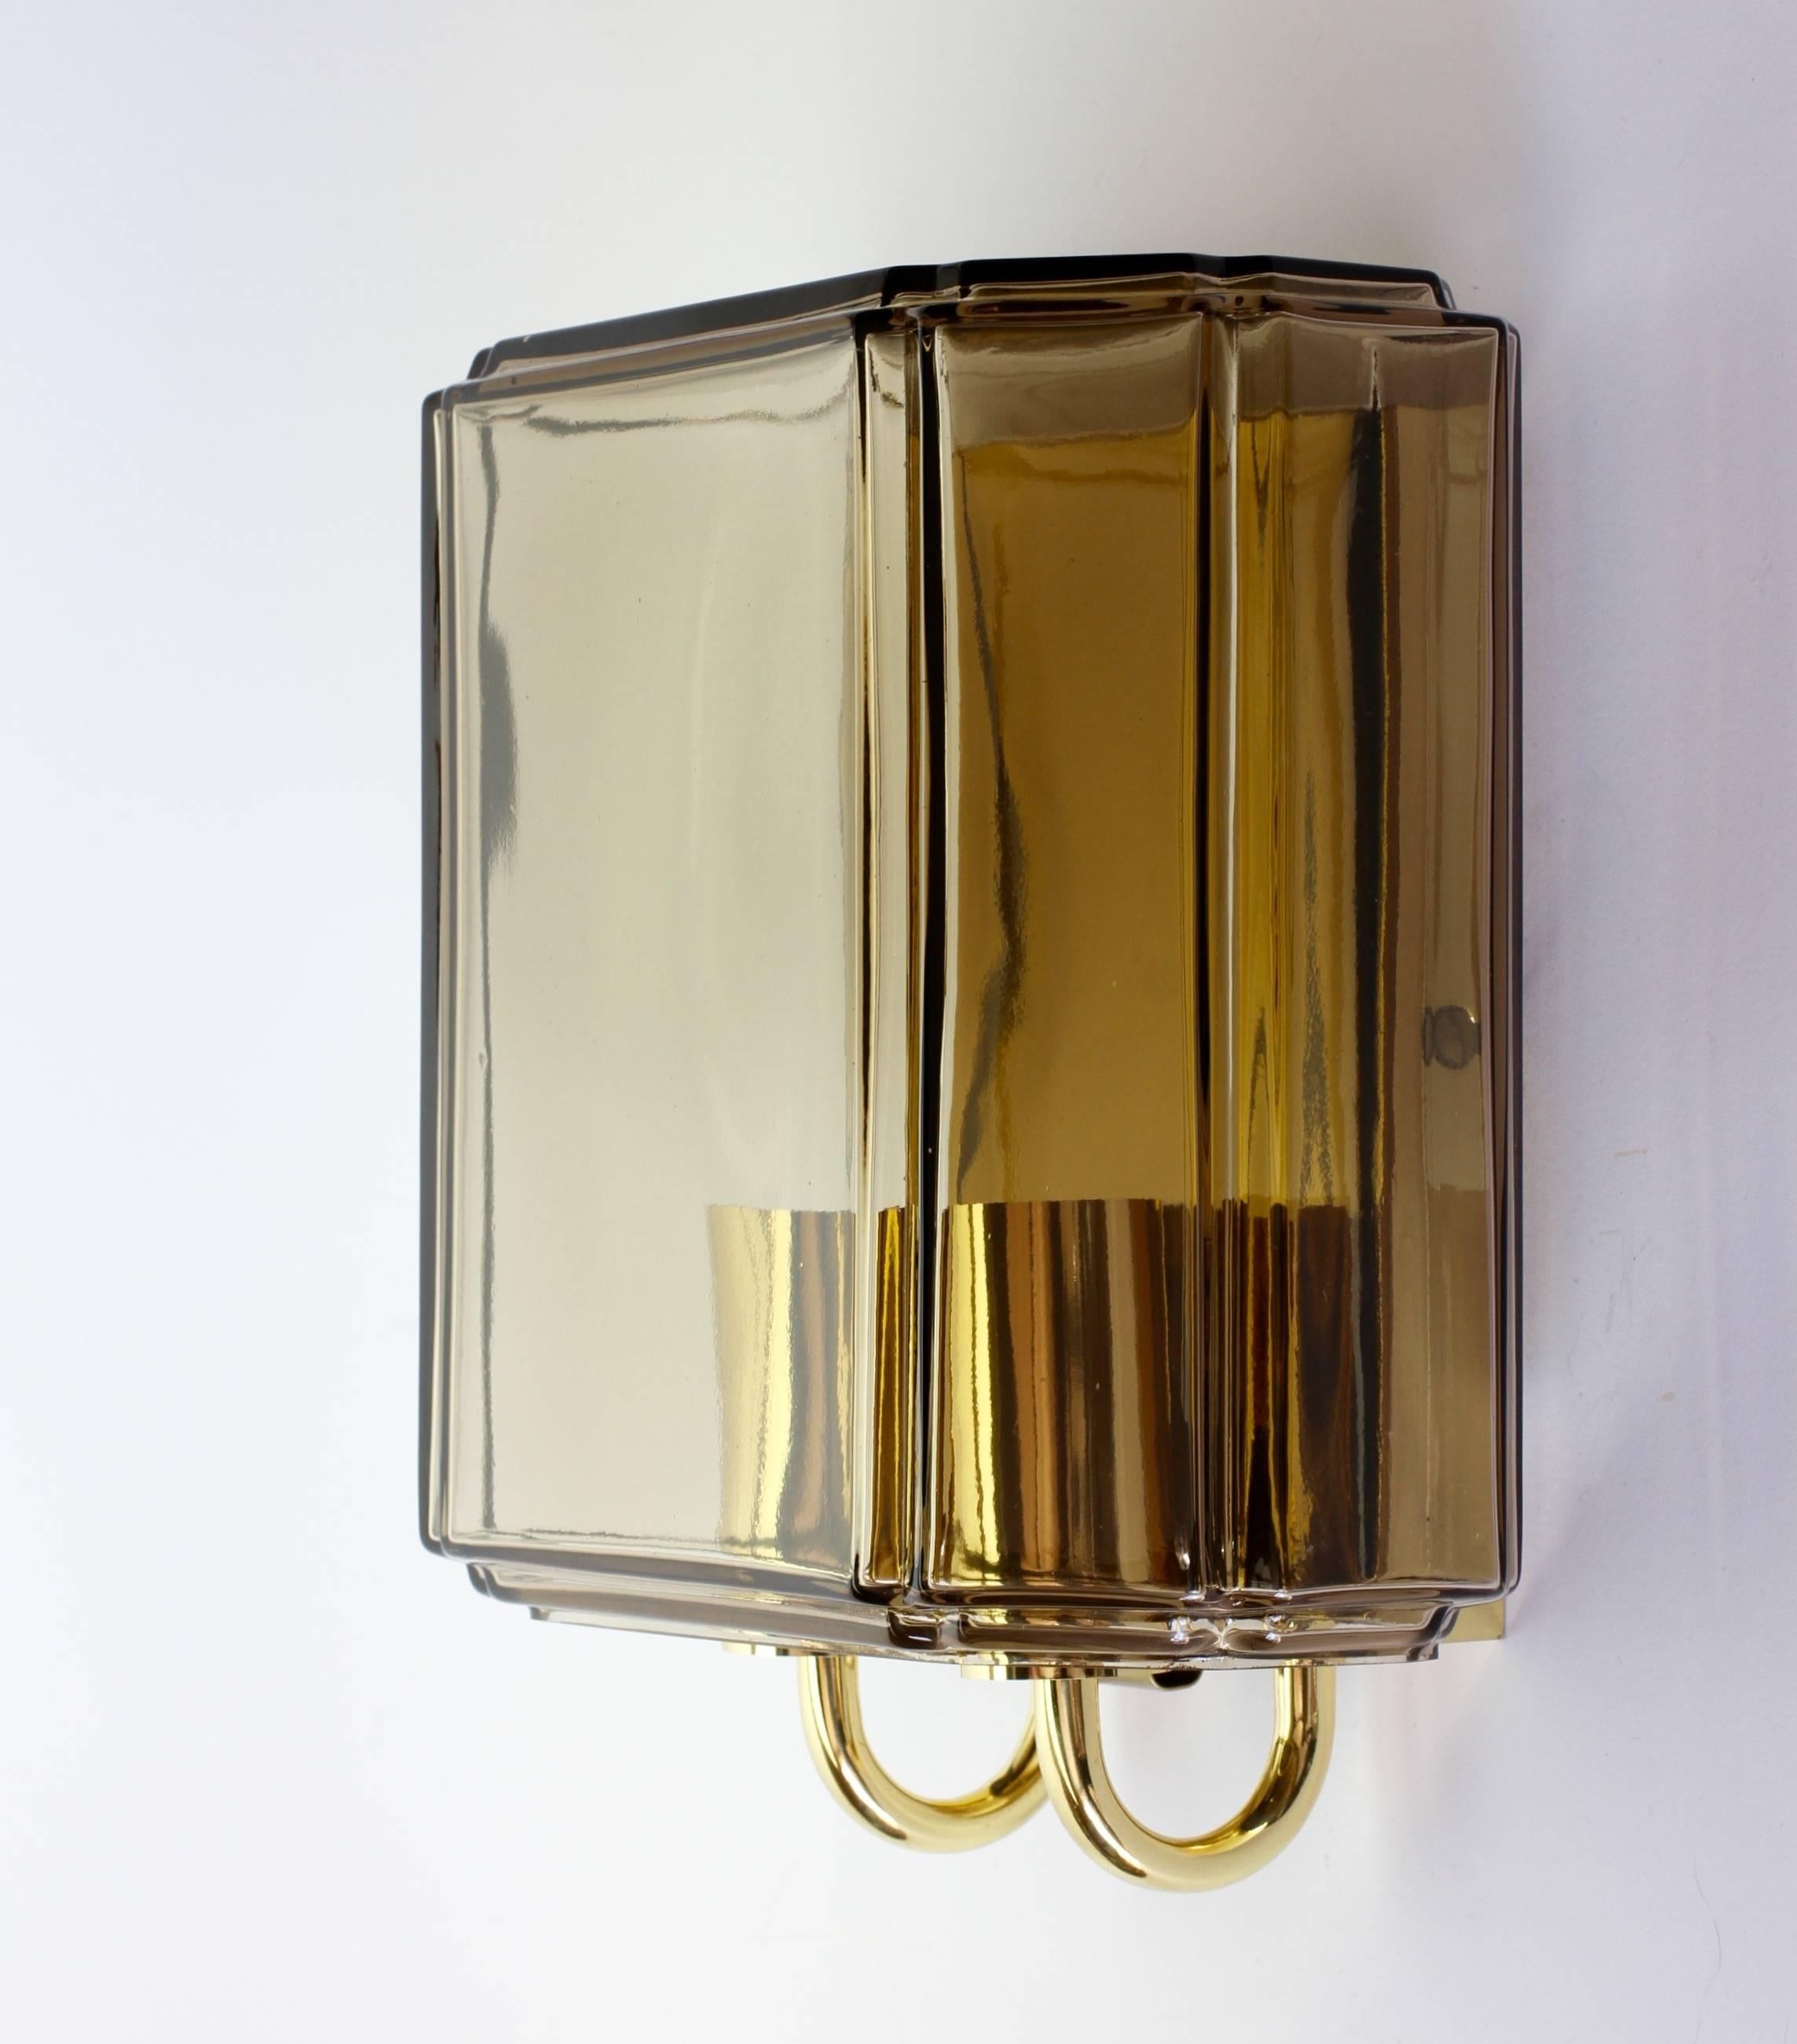 Polished Vintage 1970s Pair of Toned Glass Wall Mounted Sconces by Limburg, Germany For Sale